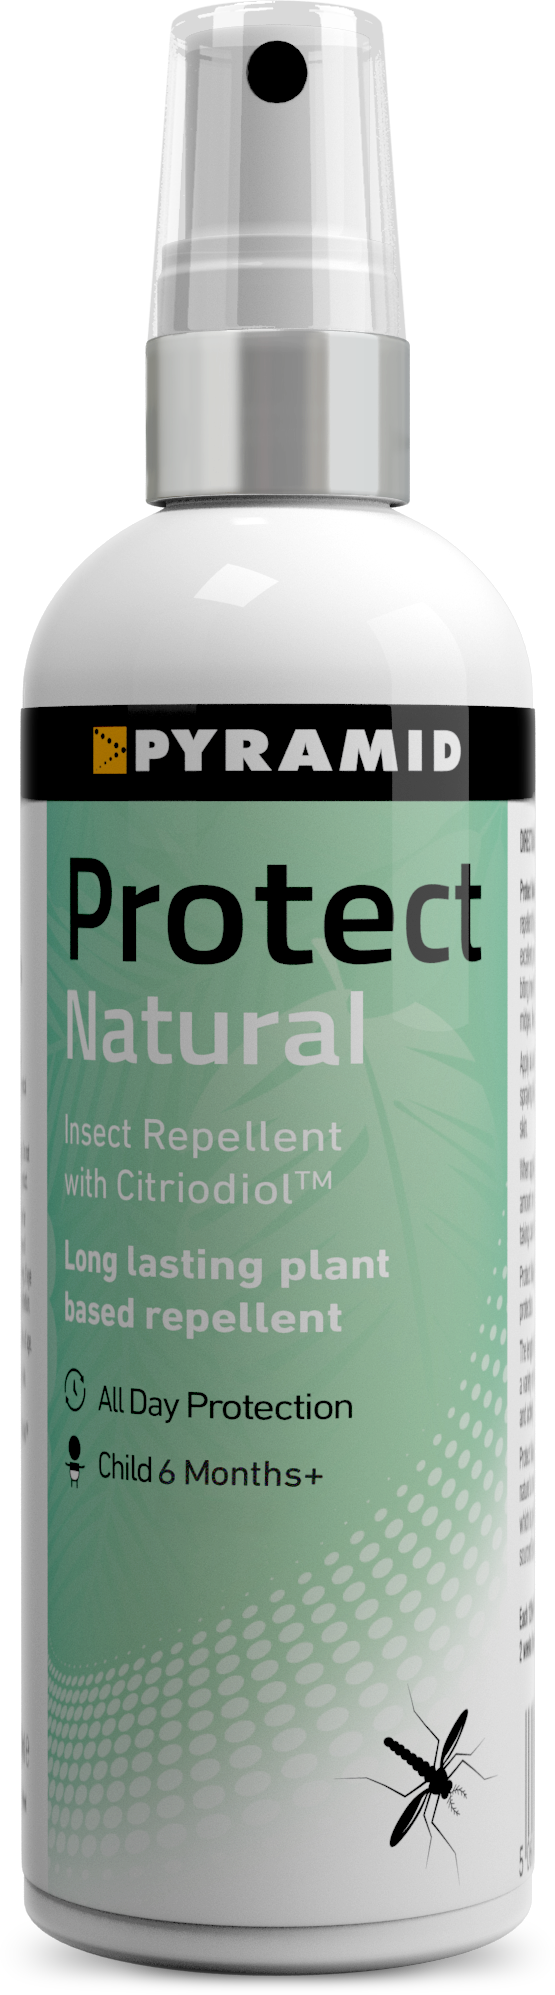 Pyramid Protect Natural Insect Repellent 100ml